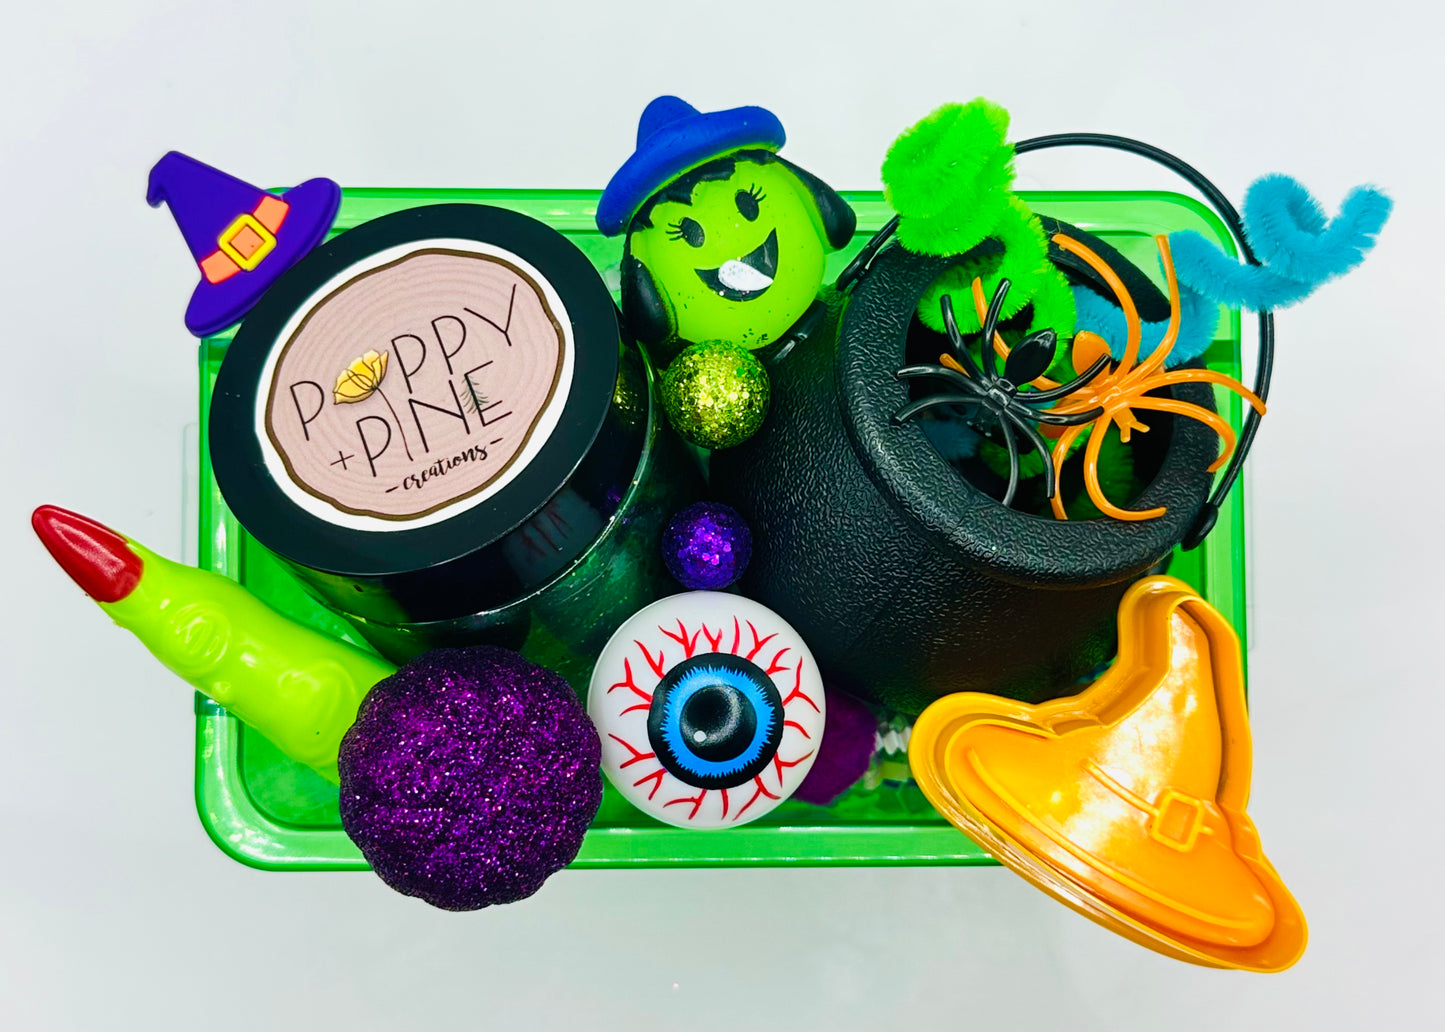 Mid-sized Witches Brew Playdough Sensory Kit Activity Toys Poppy and Pine Creations   